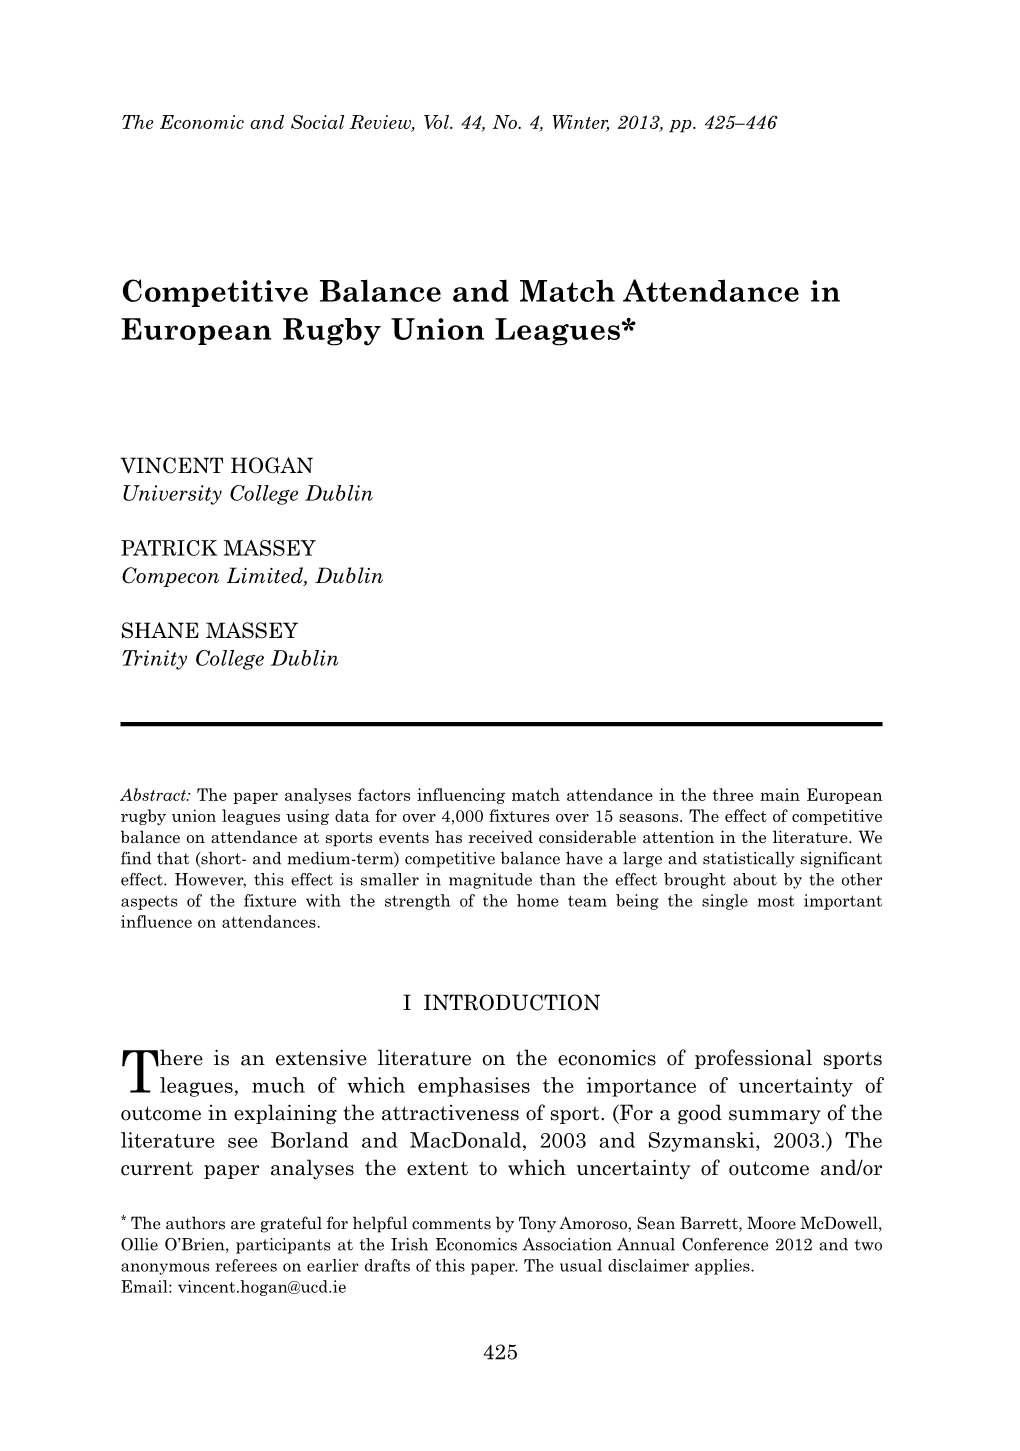 Competitive Balance and Match Attendance in European Rugby Union Leagues*